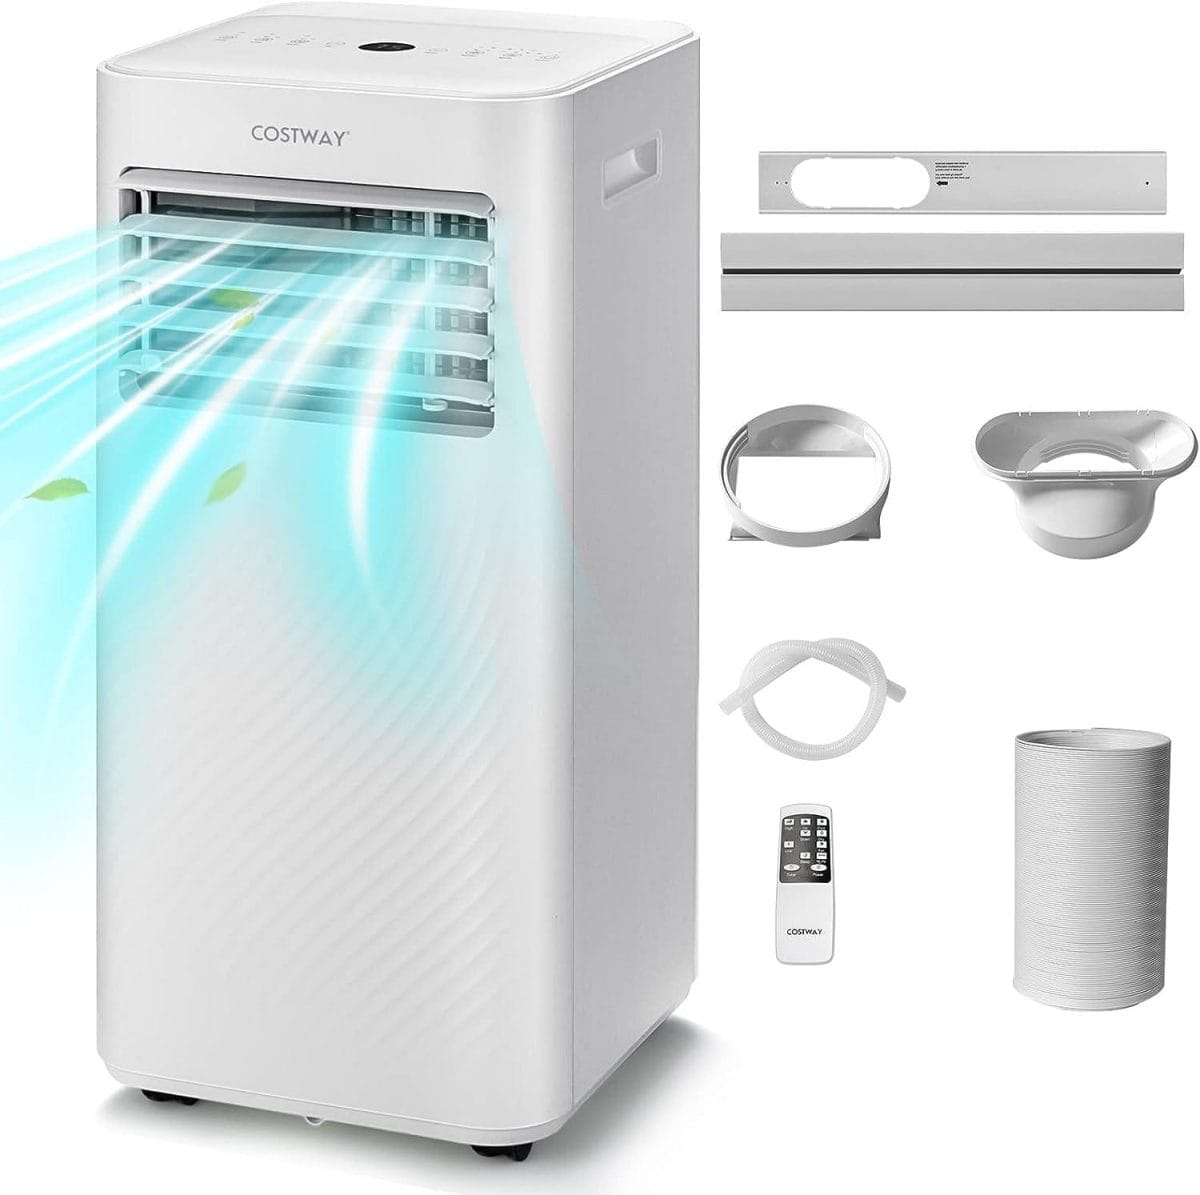 Image shows the included contents of the COSTWAY 4 in 1 Portable Air Conditioner.